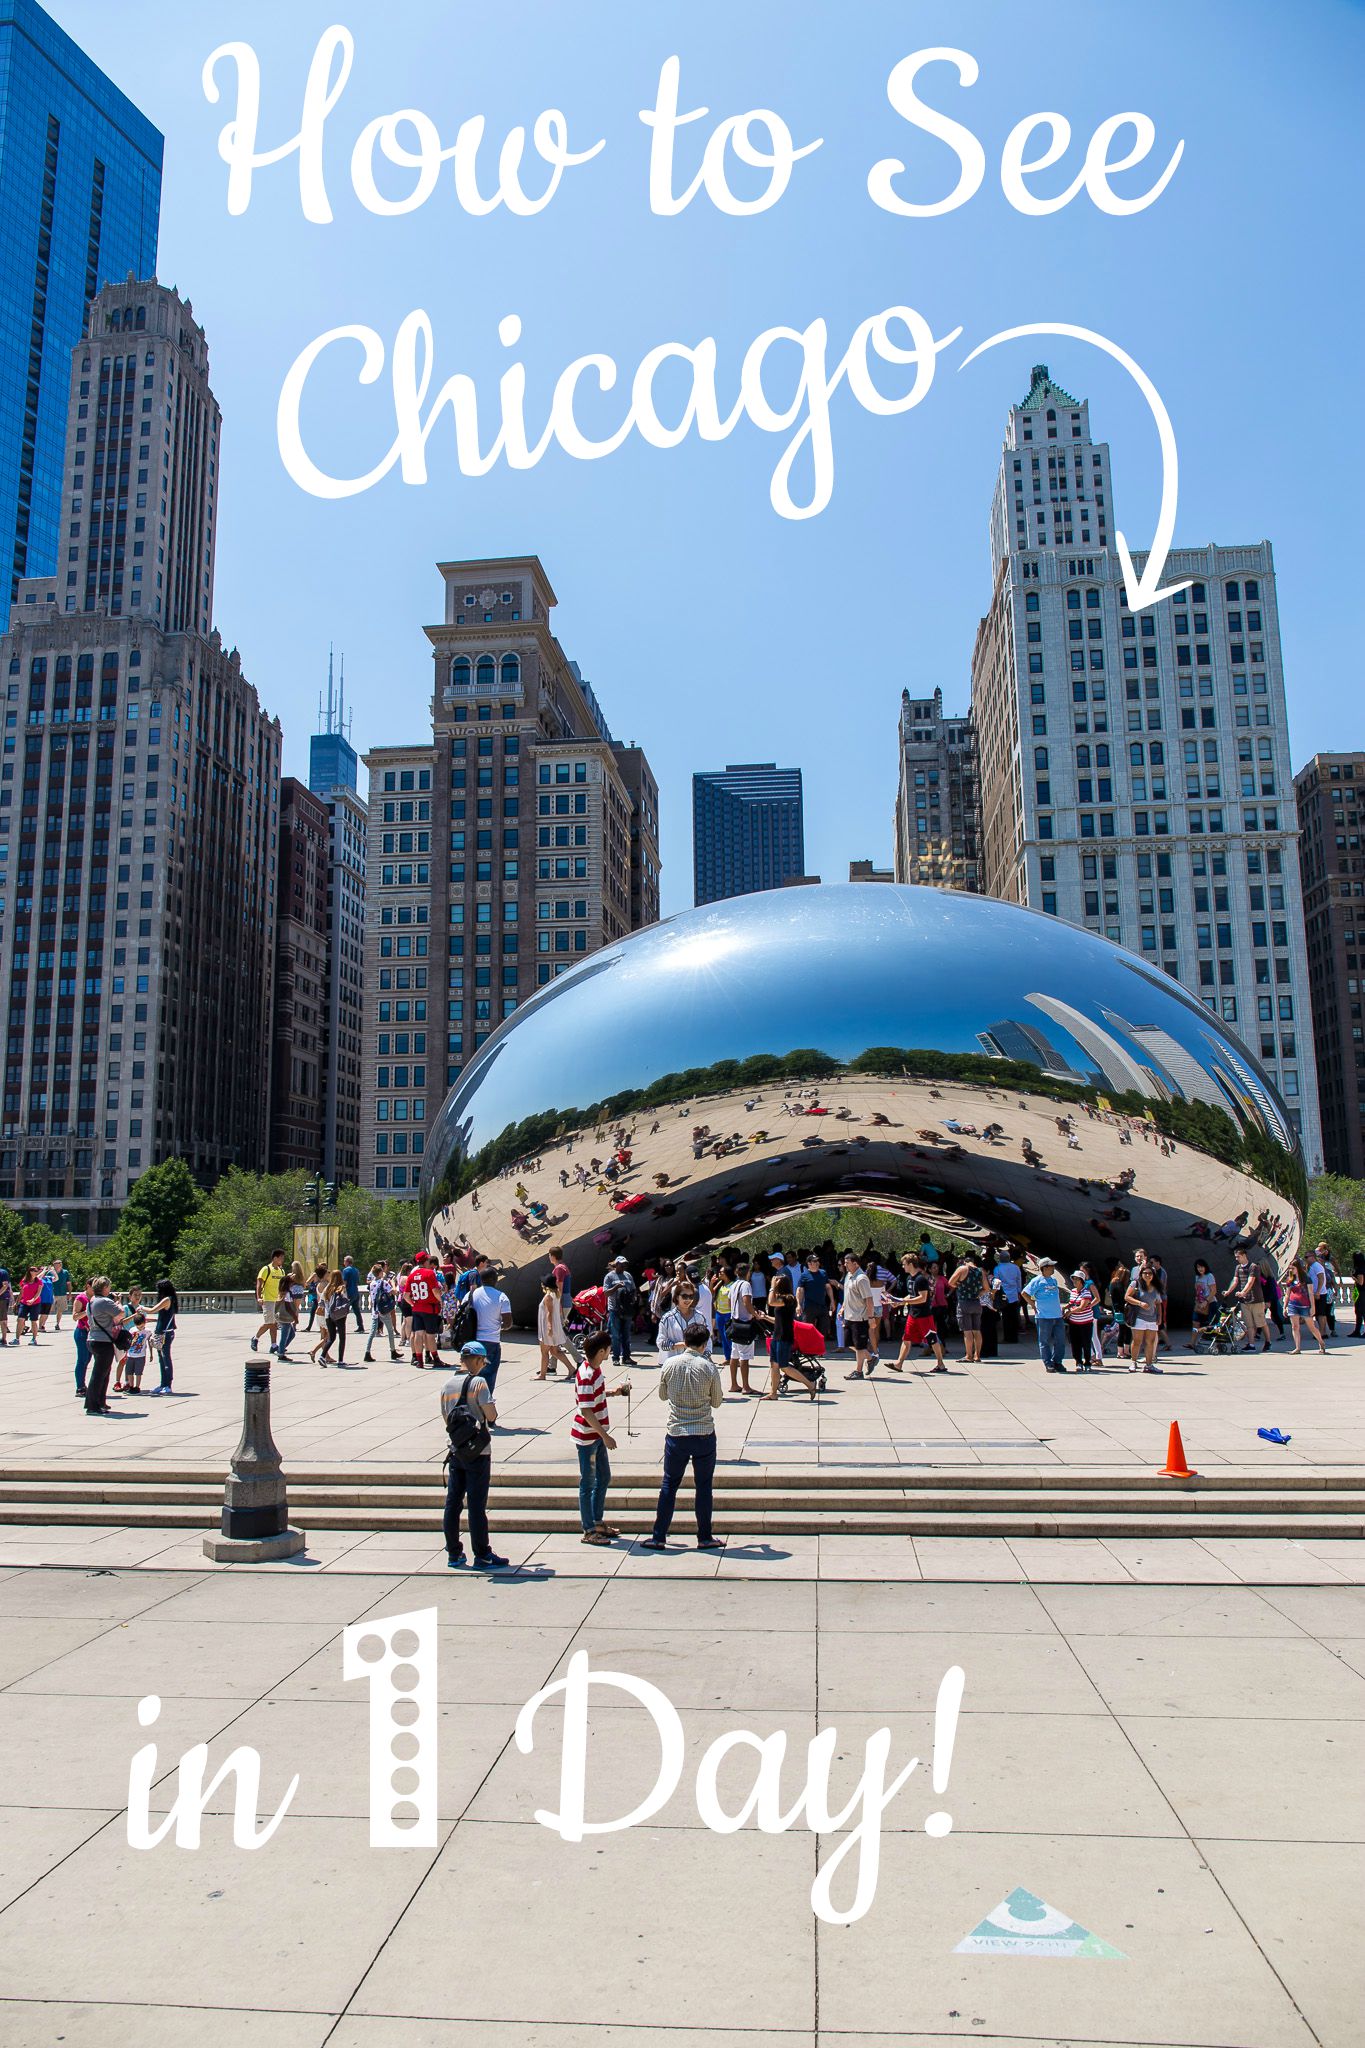 chicago one day tour package